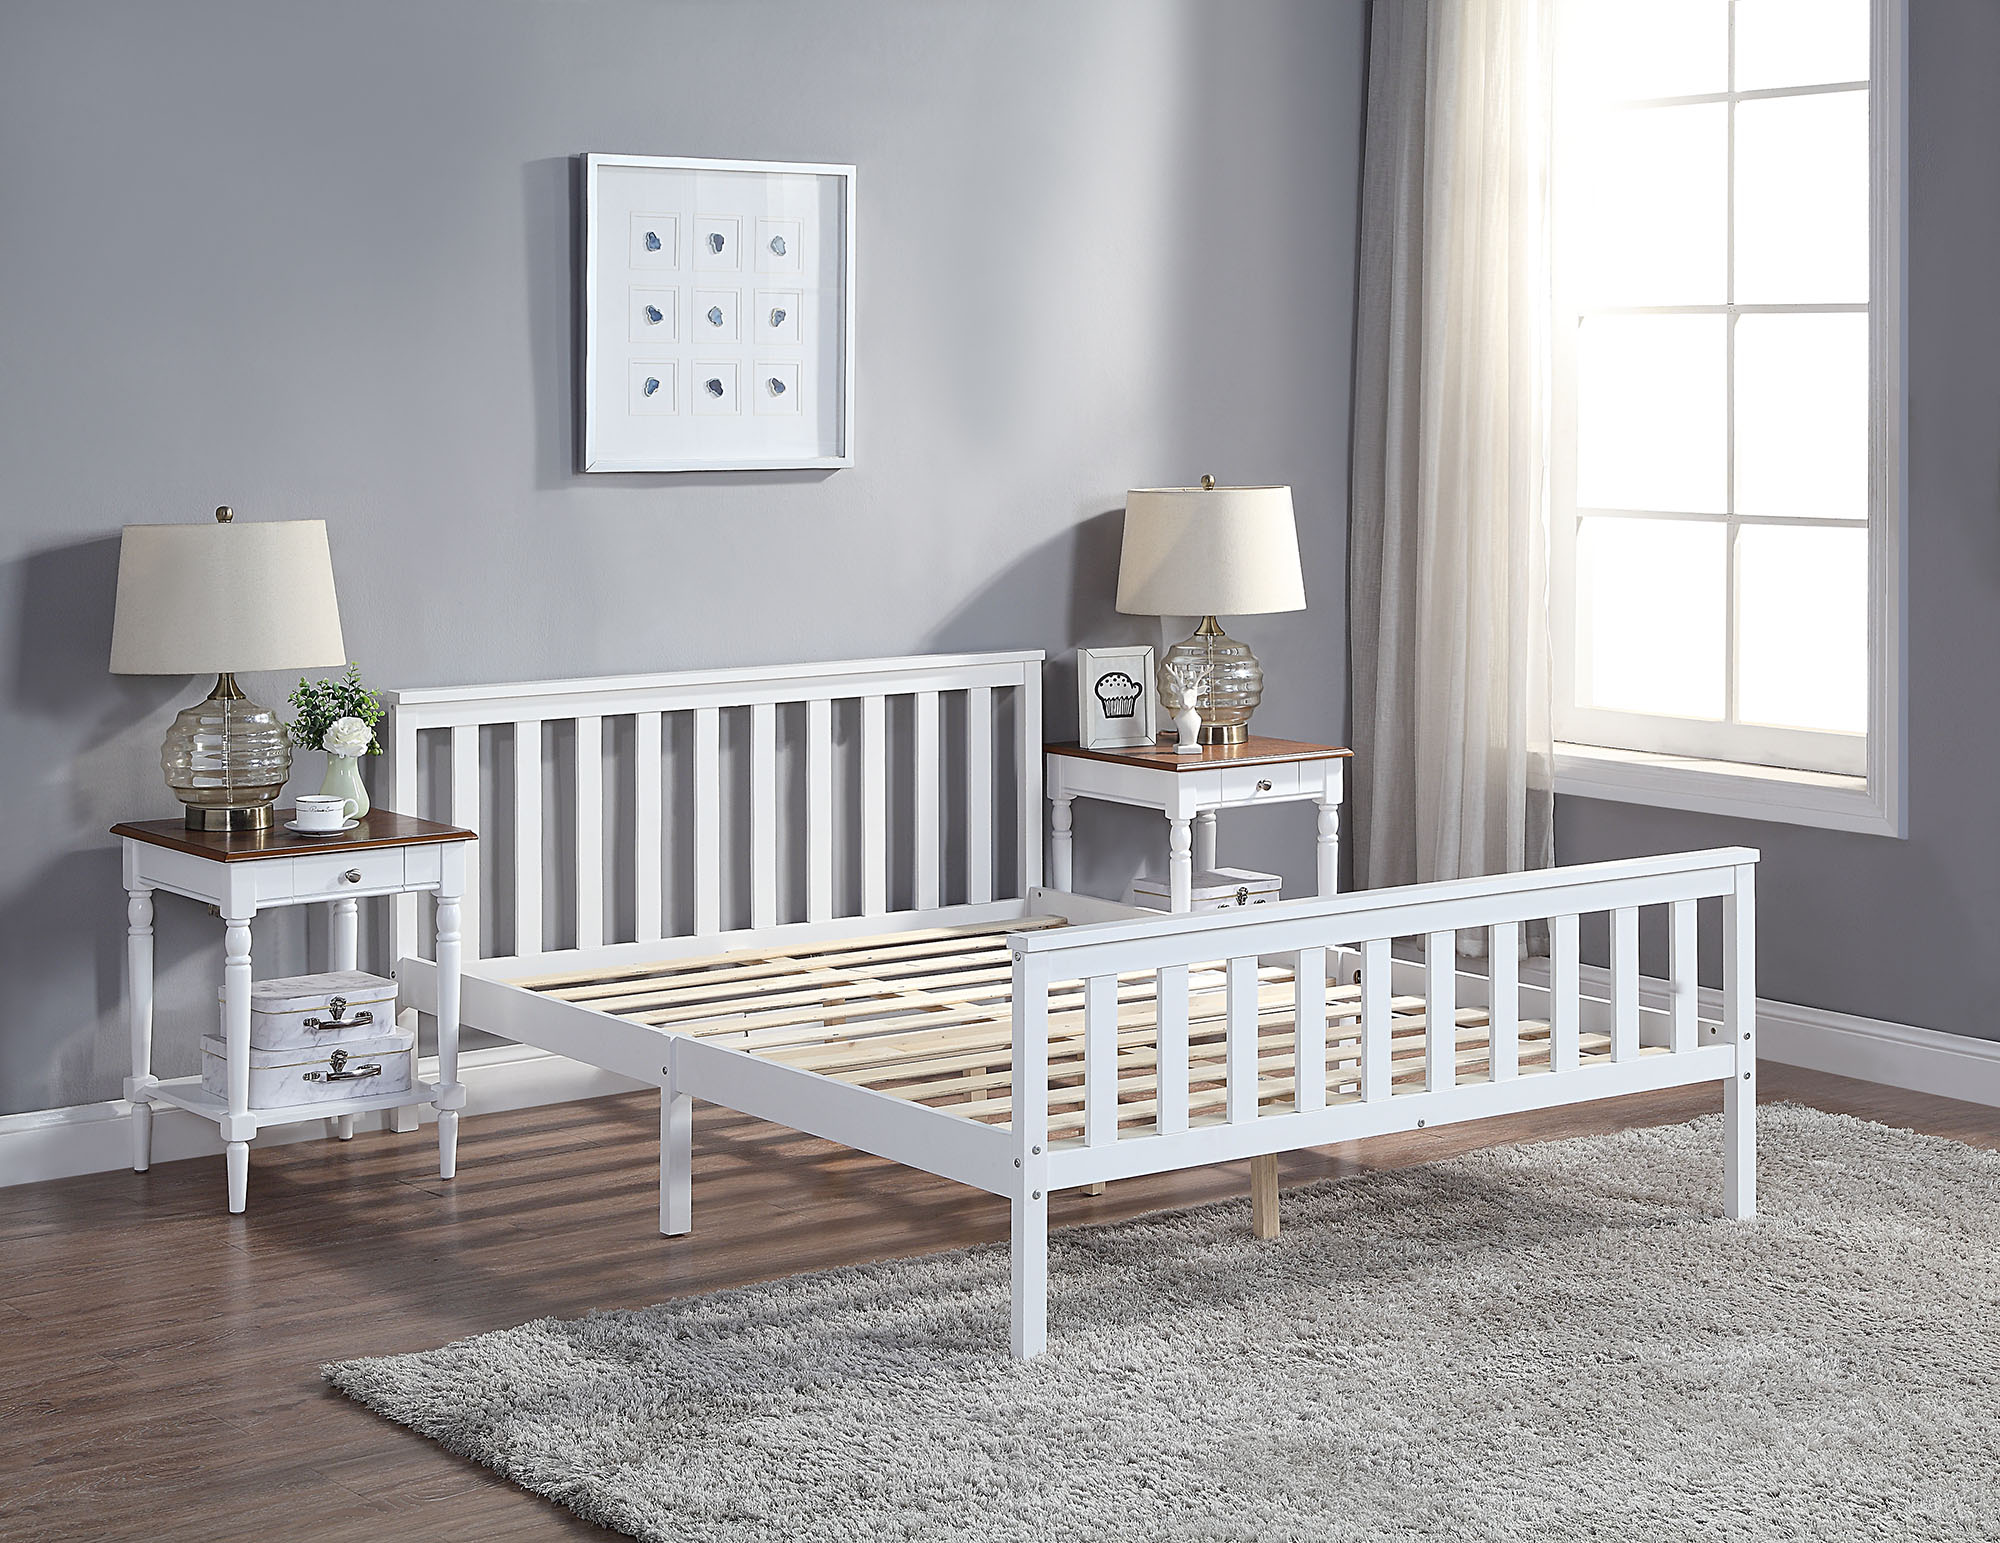 Solid Wooden Double Bed Frame In White - Home Treats UK